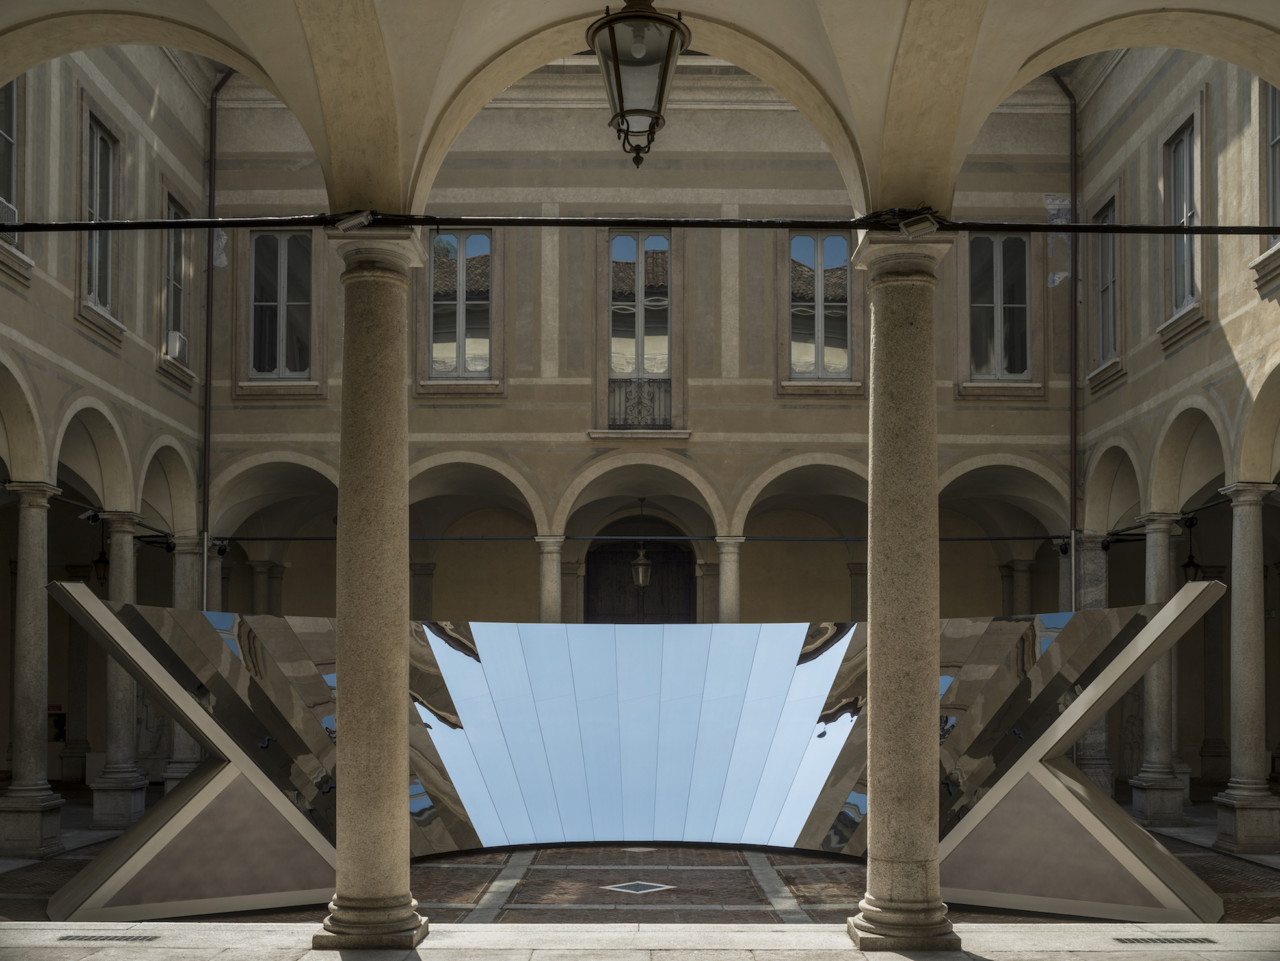 COS and Phillip K. Smith III Unfold the Milanese Sky in a Reflective Mirror Installation